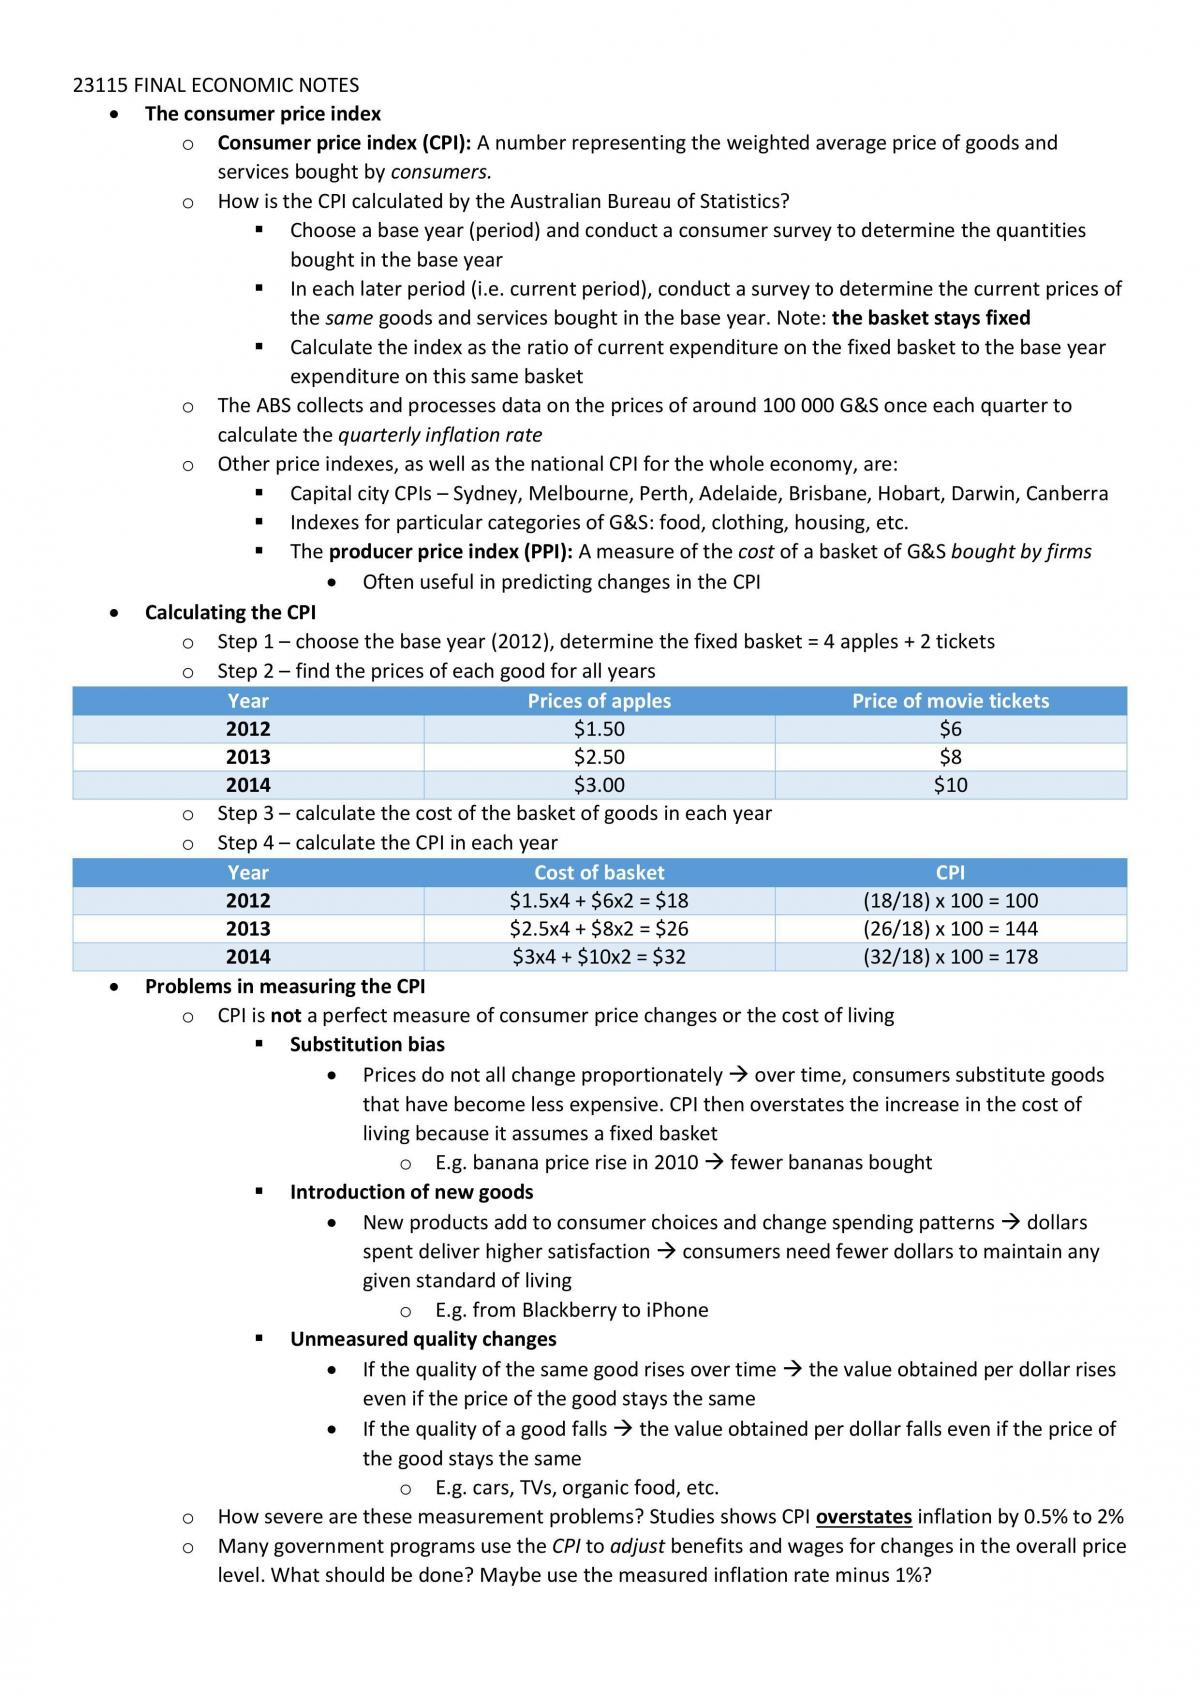 23115 Economics for Business Final Exam Notes - Page 21